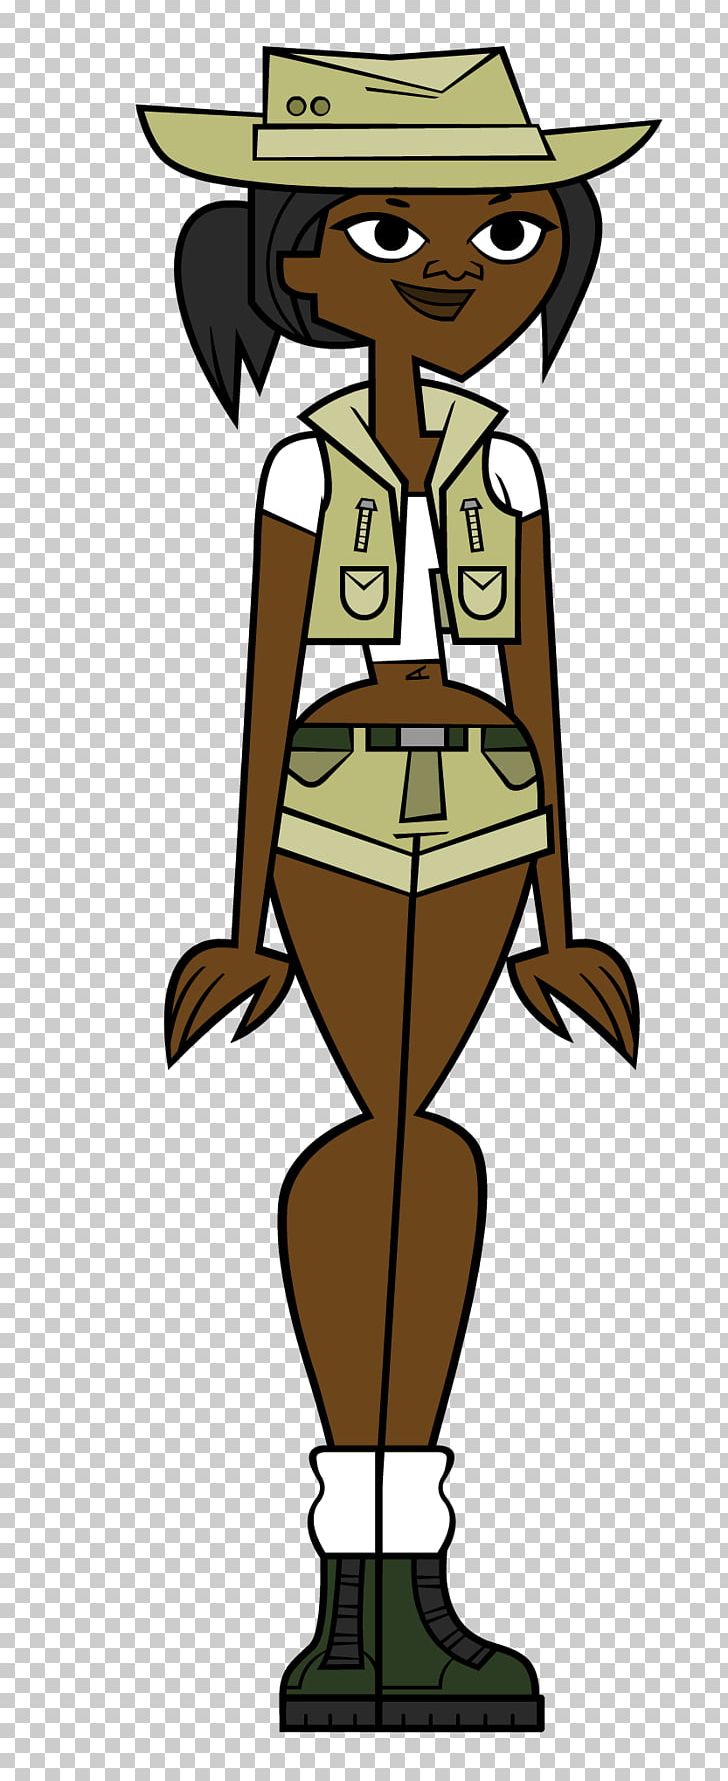 Total Drama Island Wikia Television Show Character PNG, Clipart, Animation, Cartoon, Contestant, Drama, Fictional Character Free PNG Download